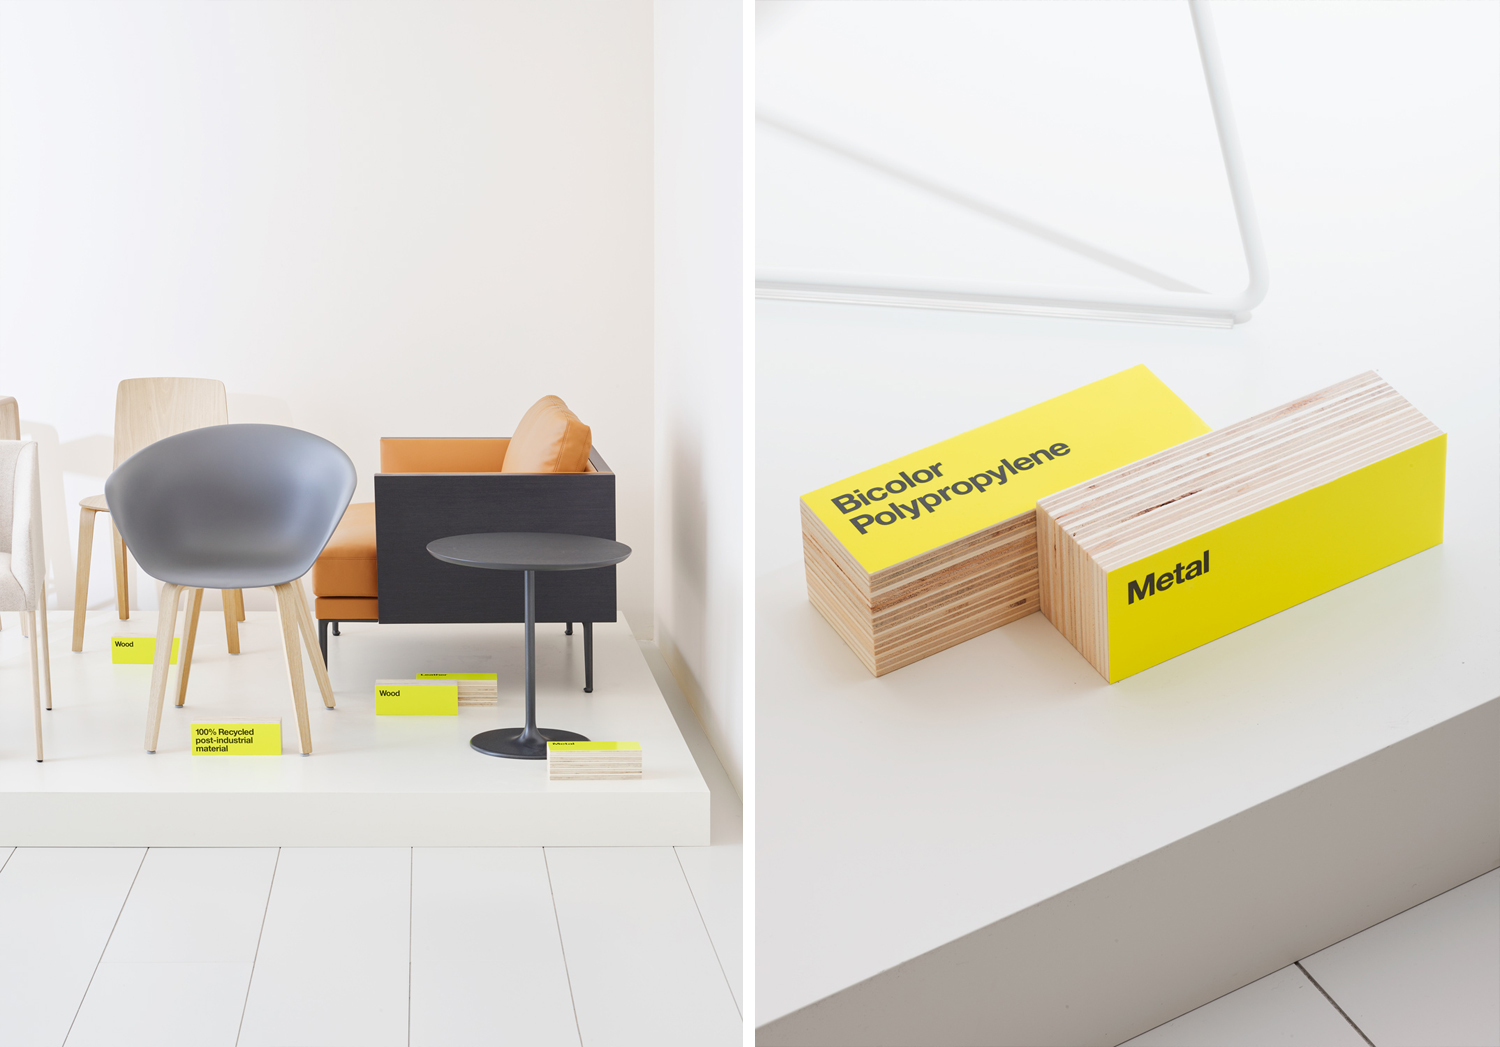 Graphic identity and signage by Clase bcn for Italian furniture company Arper